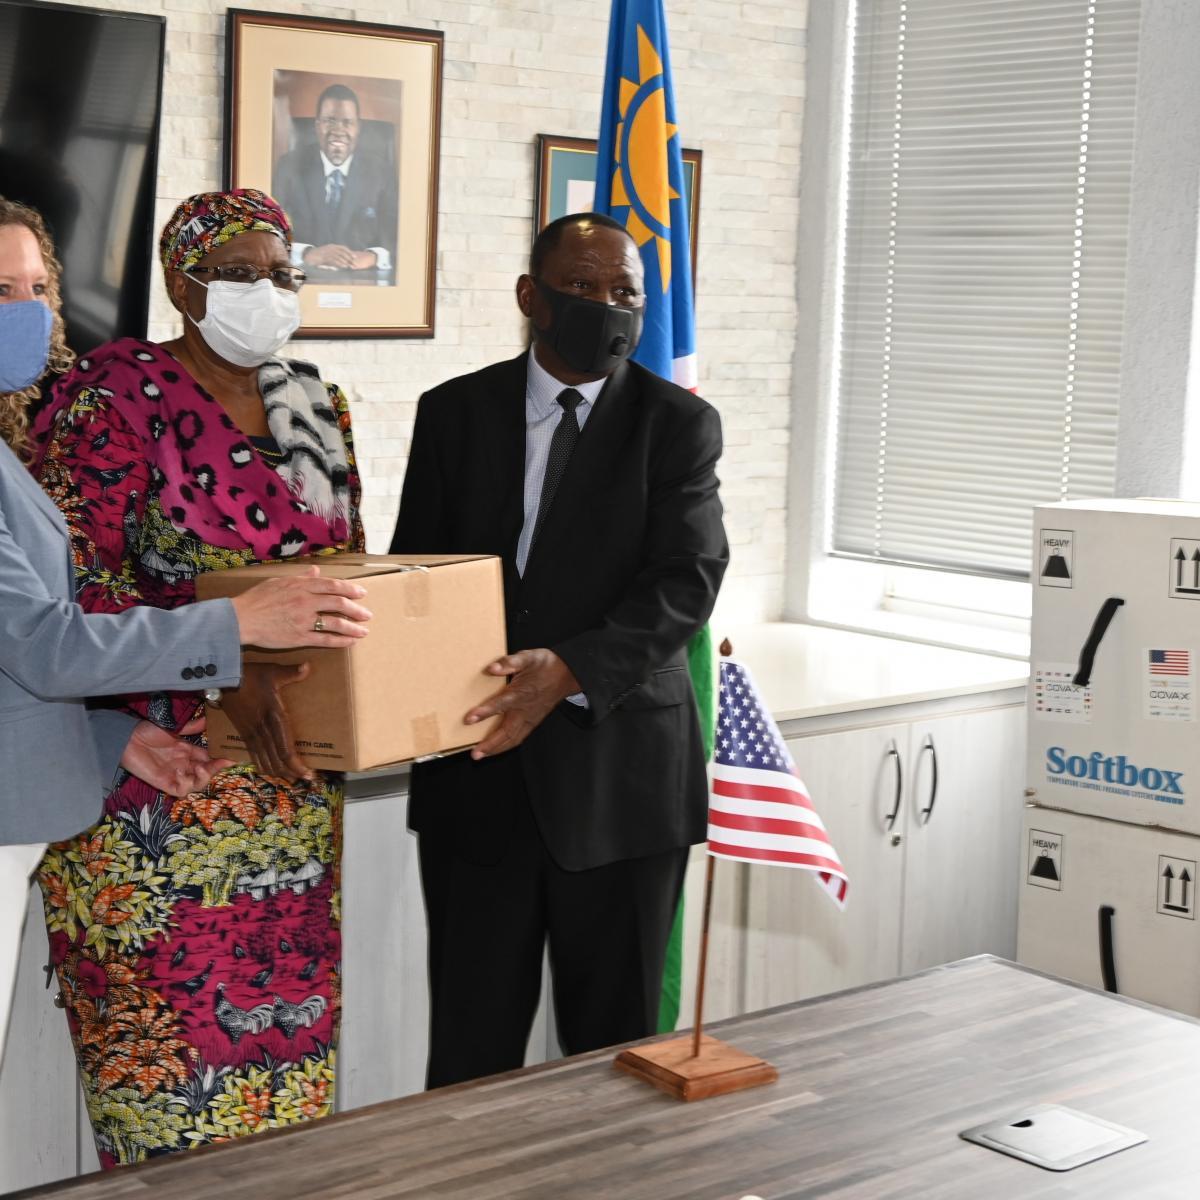 Handing over 124,000 doses of the Pfizer BioNTech COVID-19 vaccine donated by the United States government (from left): U.S. Embassy Chargé d’Affaires, Jess Long, Deputy Prime Minister and Minister of International Relations and Cooperation, Hon. Netumbo Nandi-Ndaitwah, and the Minister of Health and Social Services, Hon. Dr. Kalumbi Shangula.